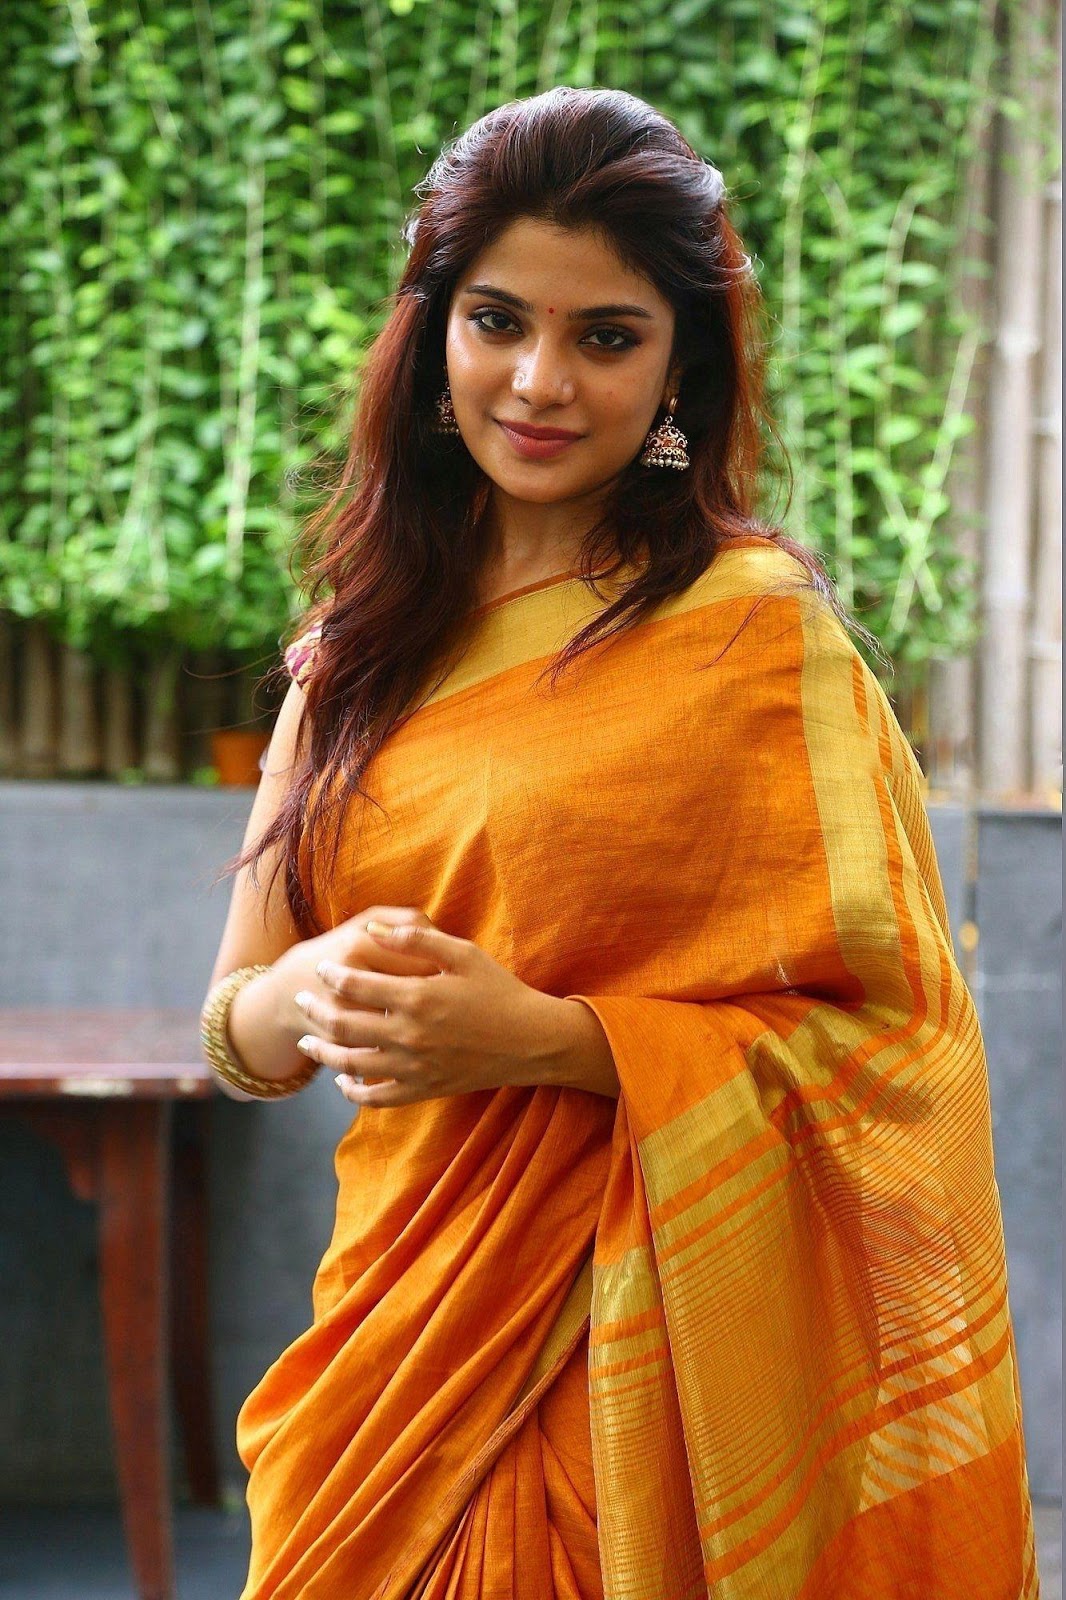 Actress Aathmika Aka Latest Photo Stills Latest Indian Hollywood Movies Updates Branding Online And Actress Gallery Instagram profile picture in original quality! actress aathmika aka latest photo